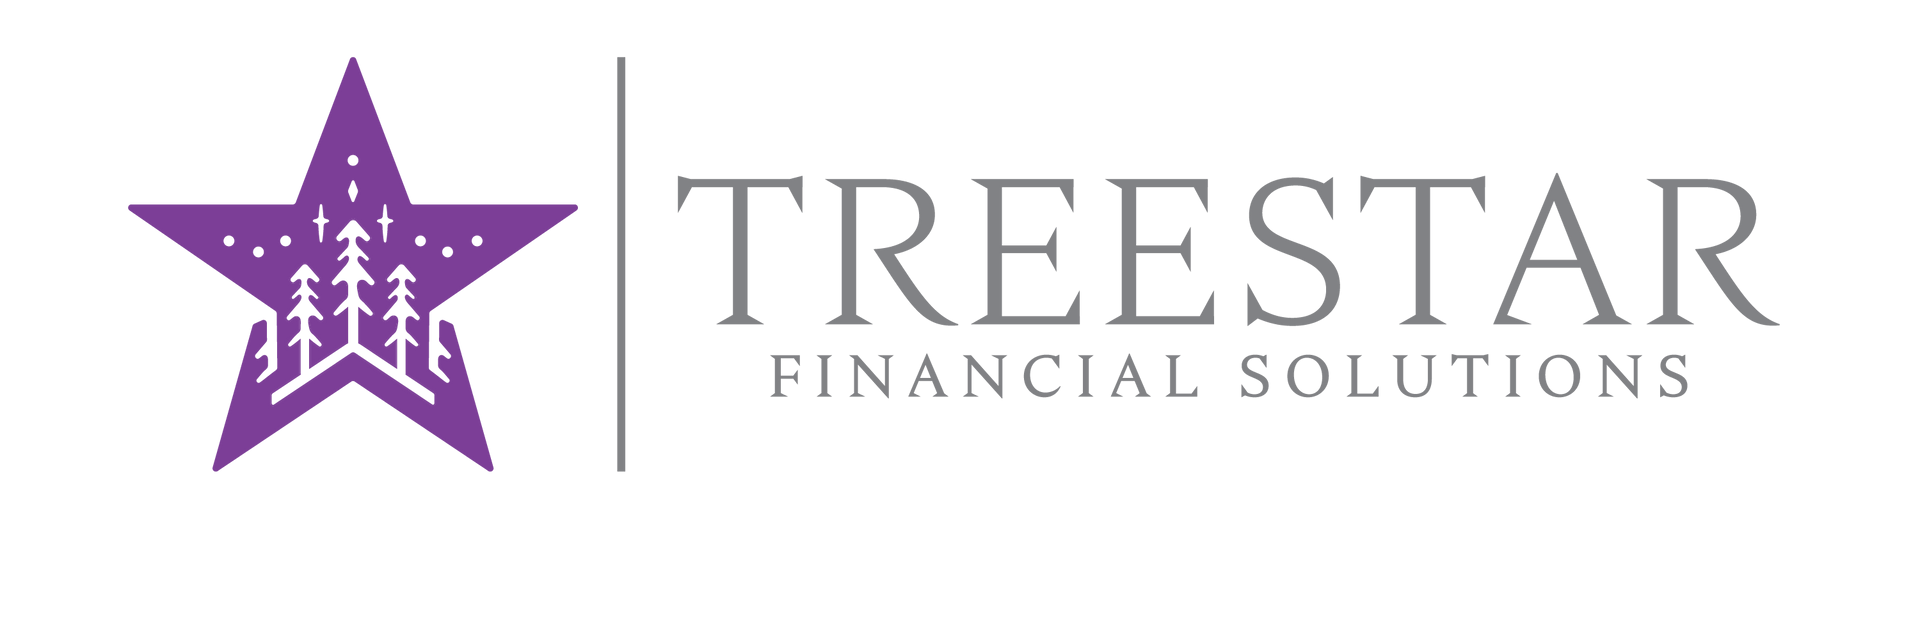 Financial Help for Businesses, Accounting for Business, Accounting for Cannabis Companies, Bookkeeping help for small businesses in Chico CA, Bookkeeping for oroville, ca, Taxes for Durham, CA. TreeStar Solutions